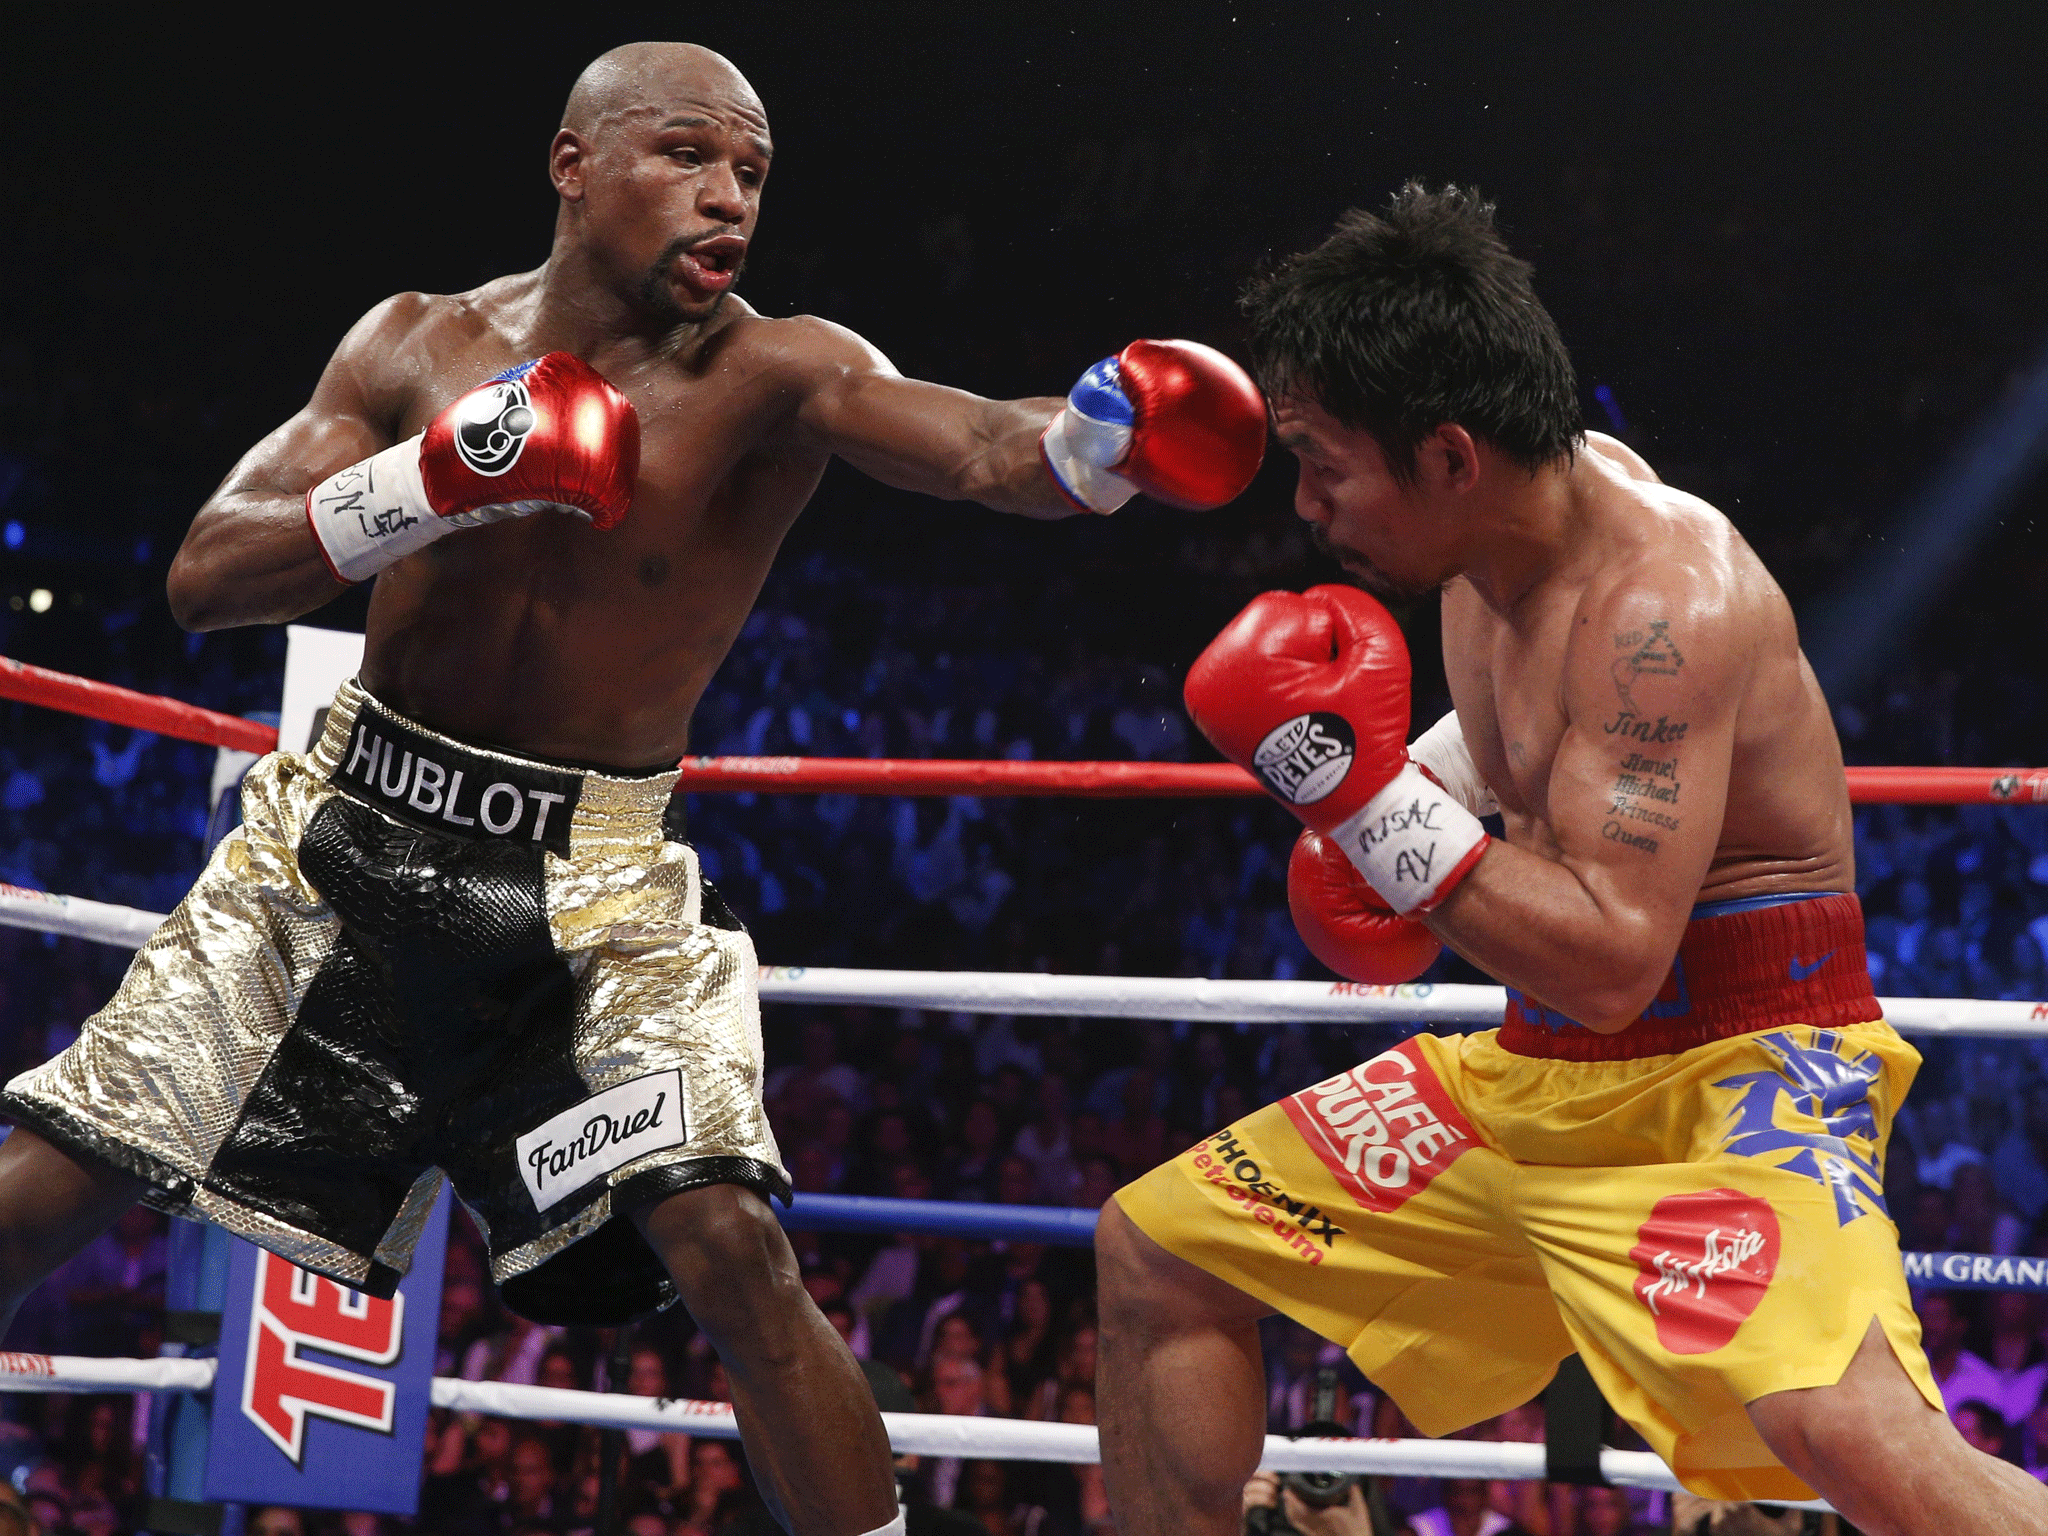 Floyd Mayweather made more money in his fight against Manny Pacquiao